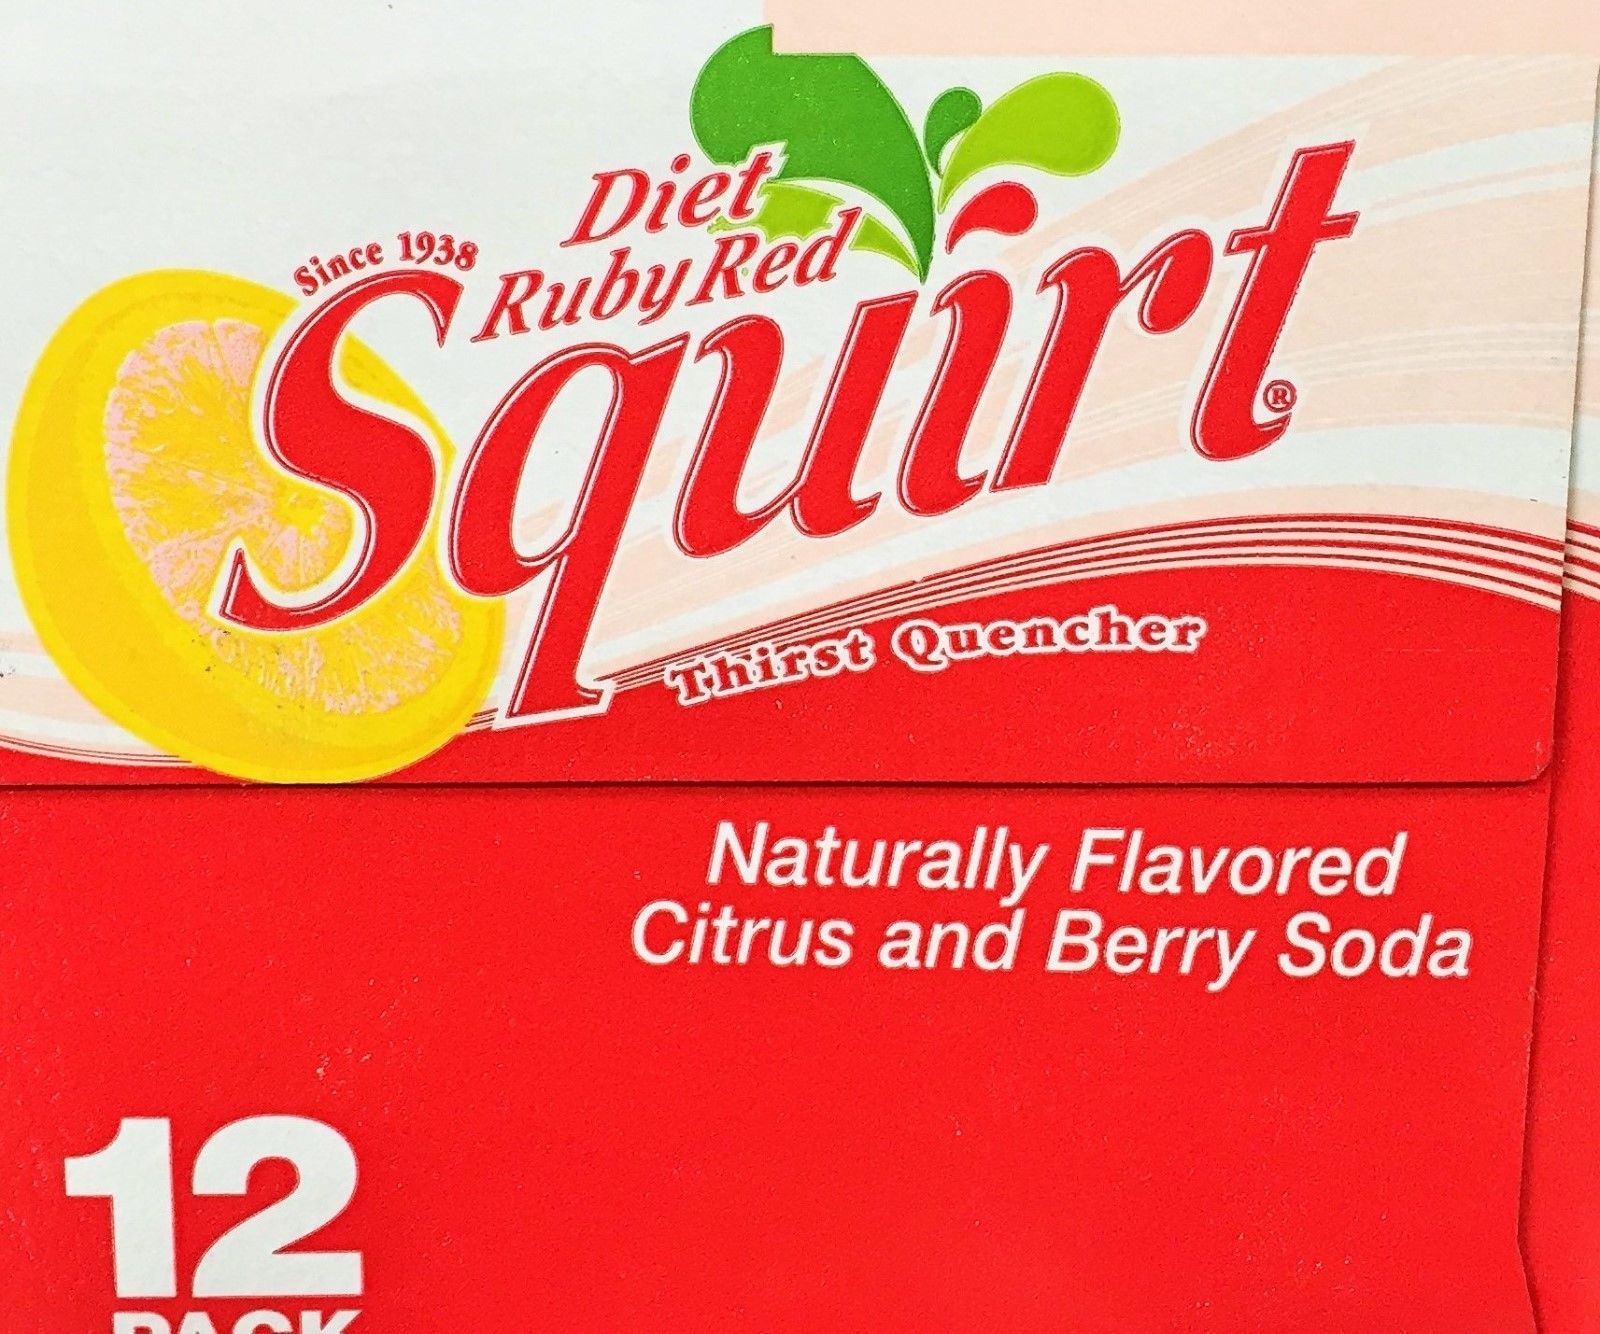 What company makes squirt soda